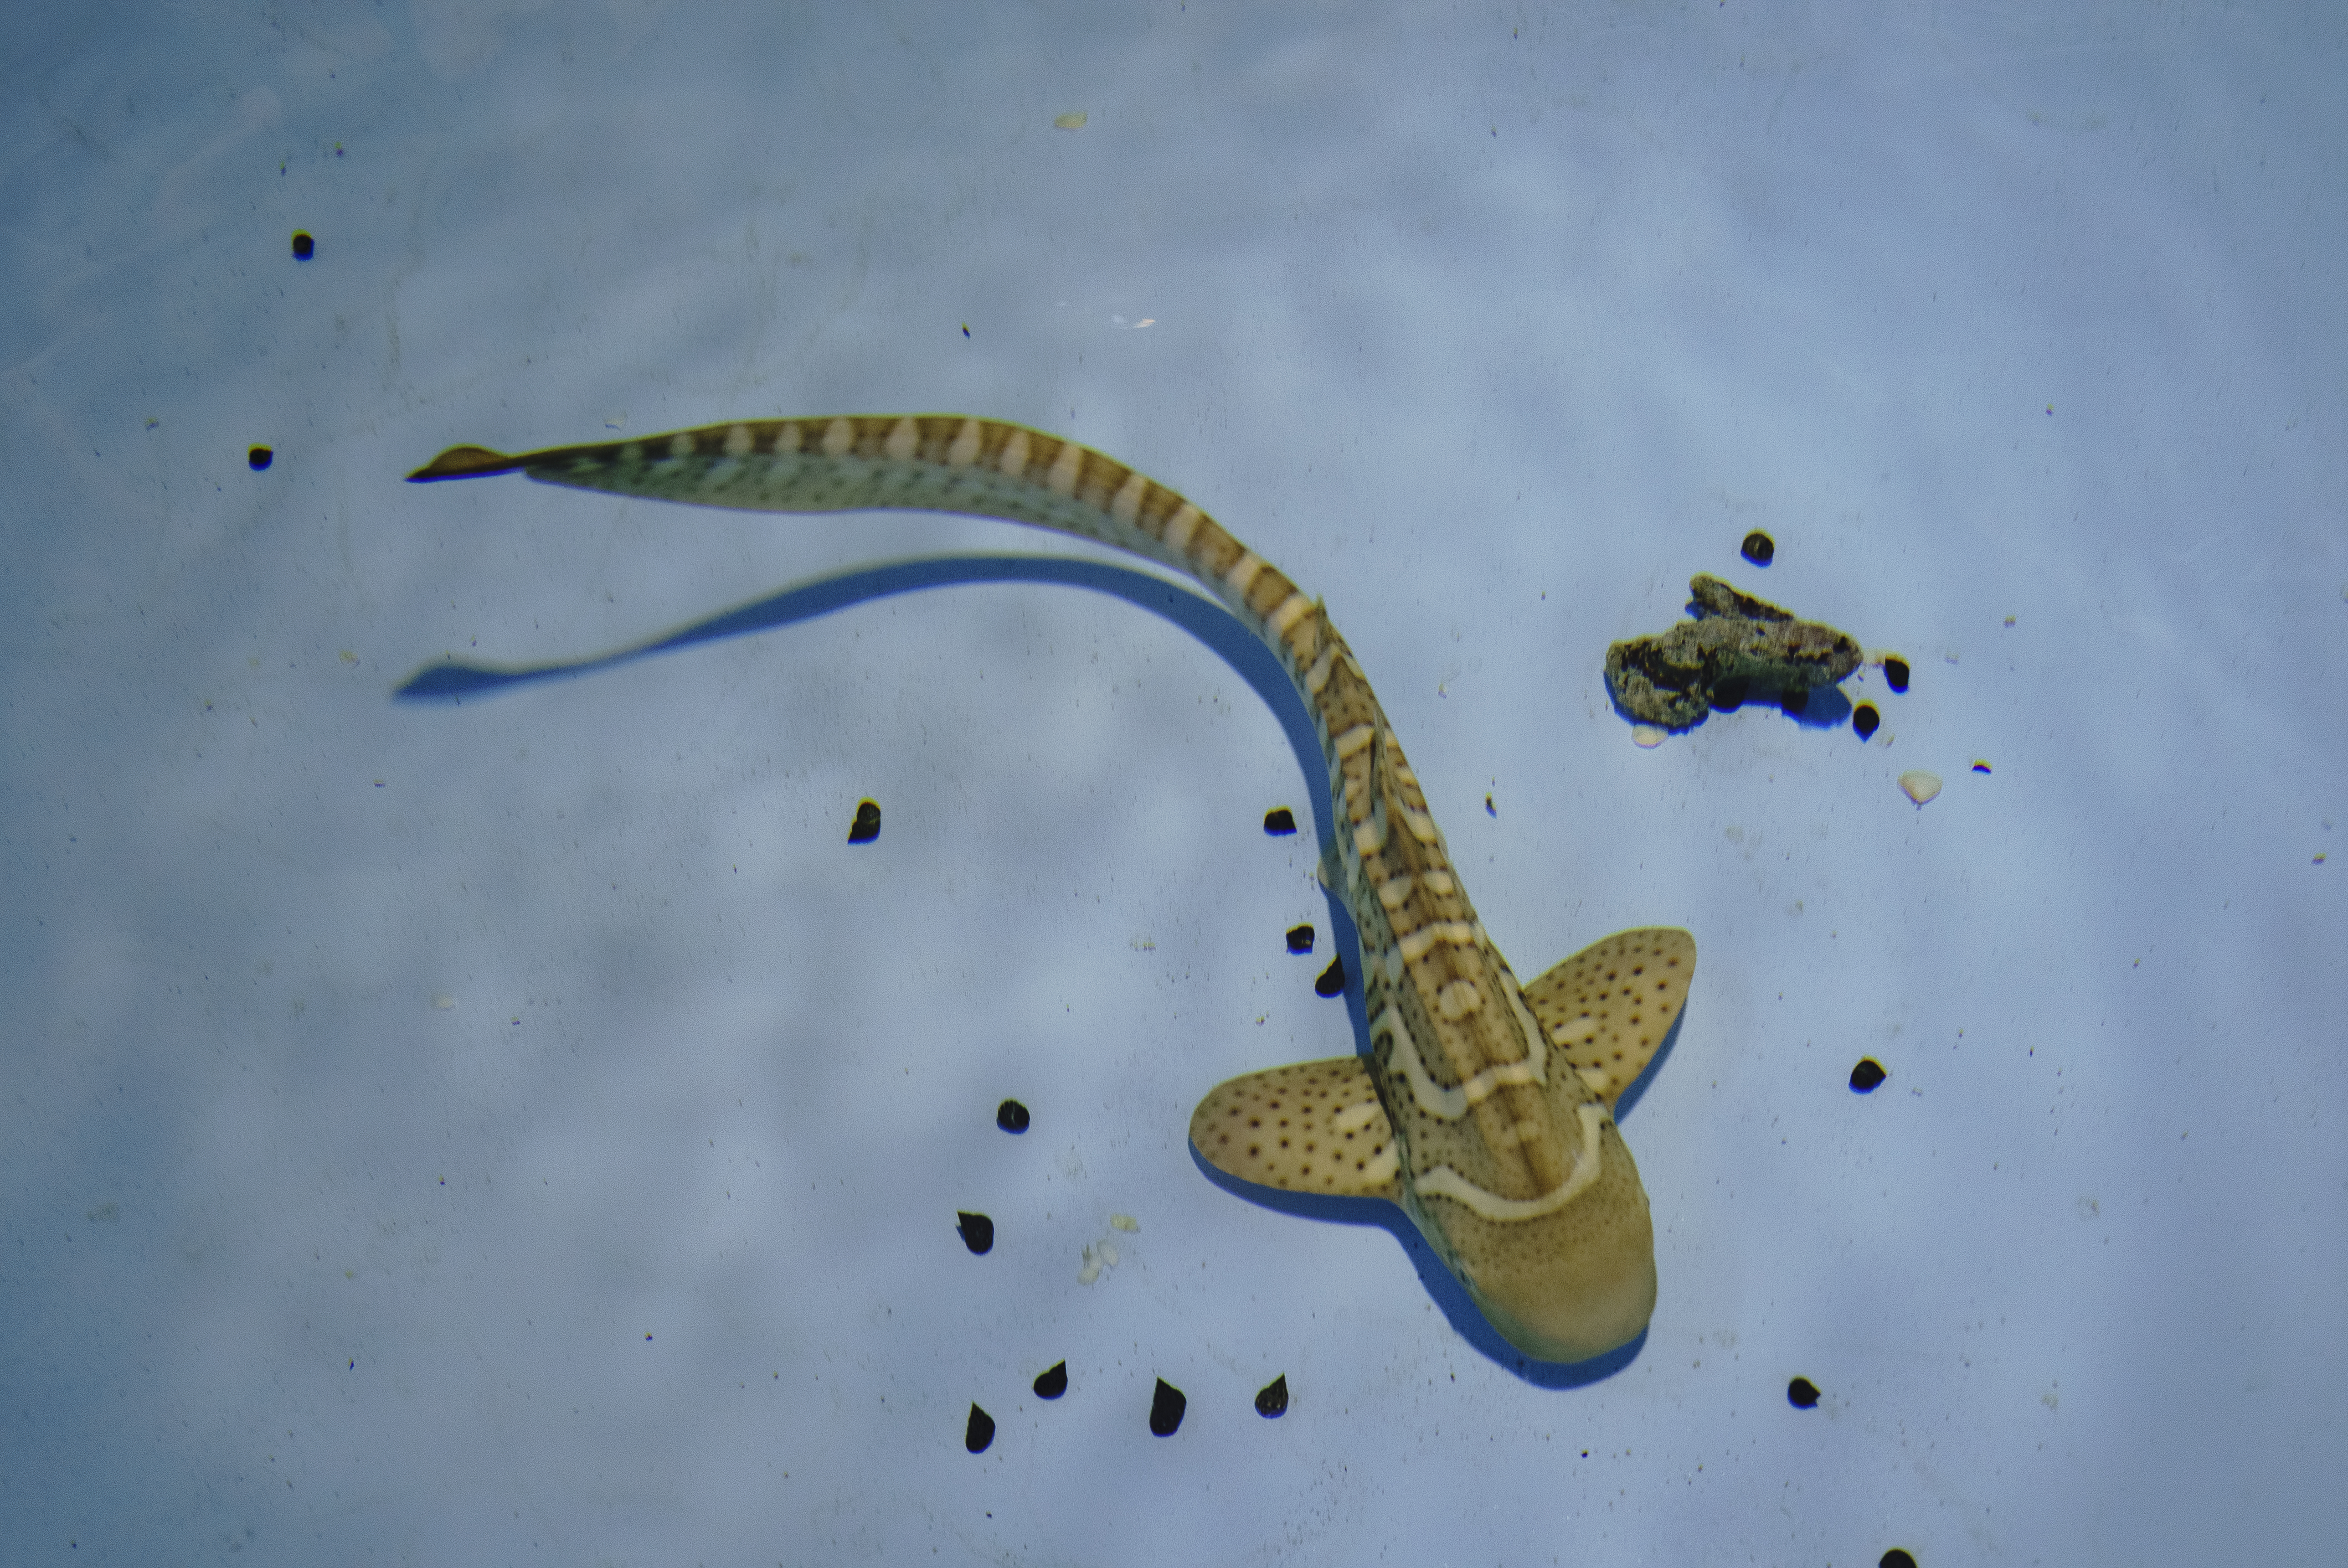 Zebra Shark Pup 'Audrey' Foraging on Snails in Nursery | Photo Credit: Indo Pacific Film